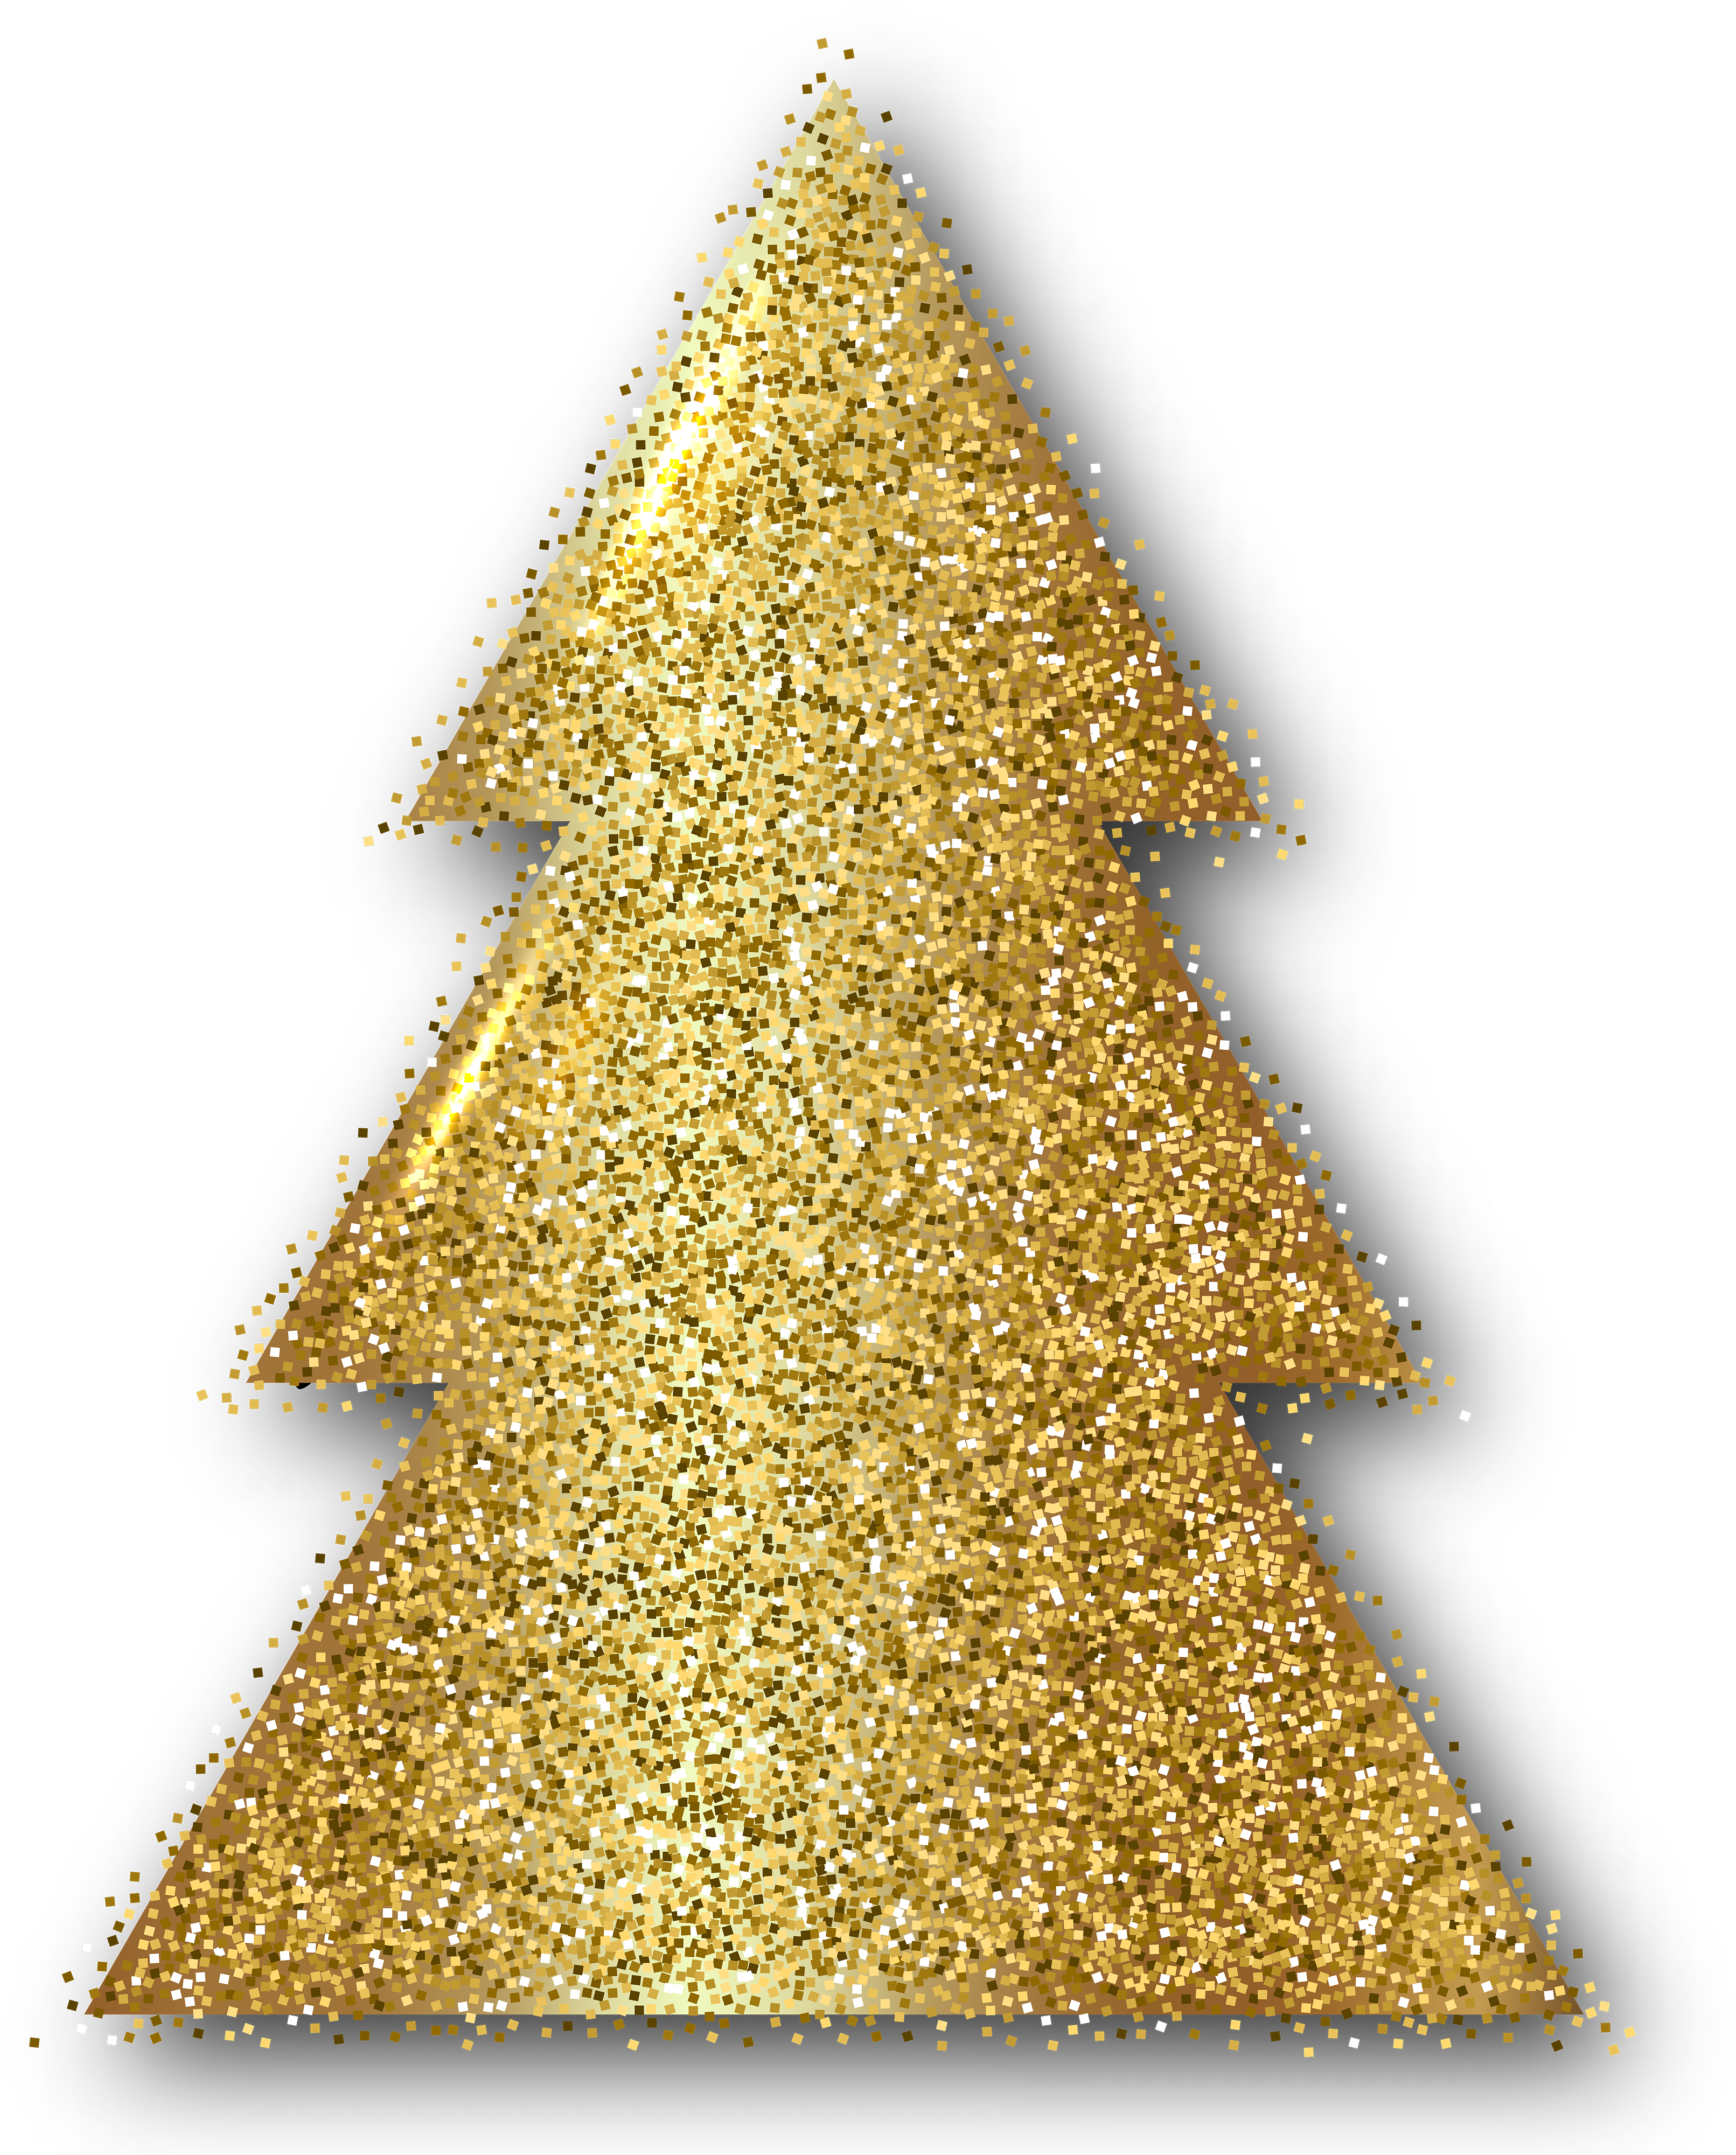 A Gold Glittery Tree With Great Pyramid Of Giza In The Background